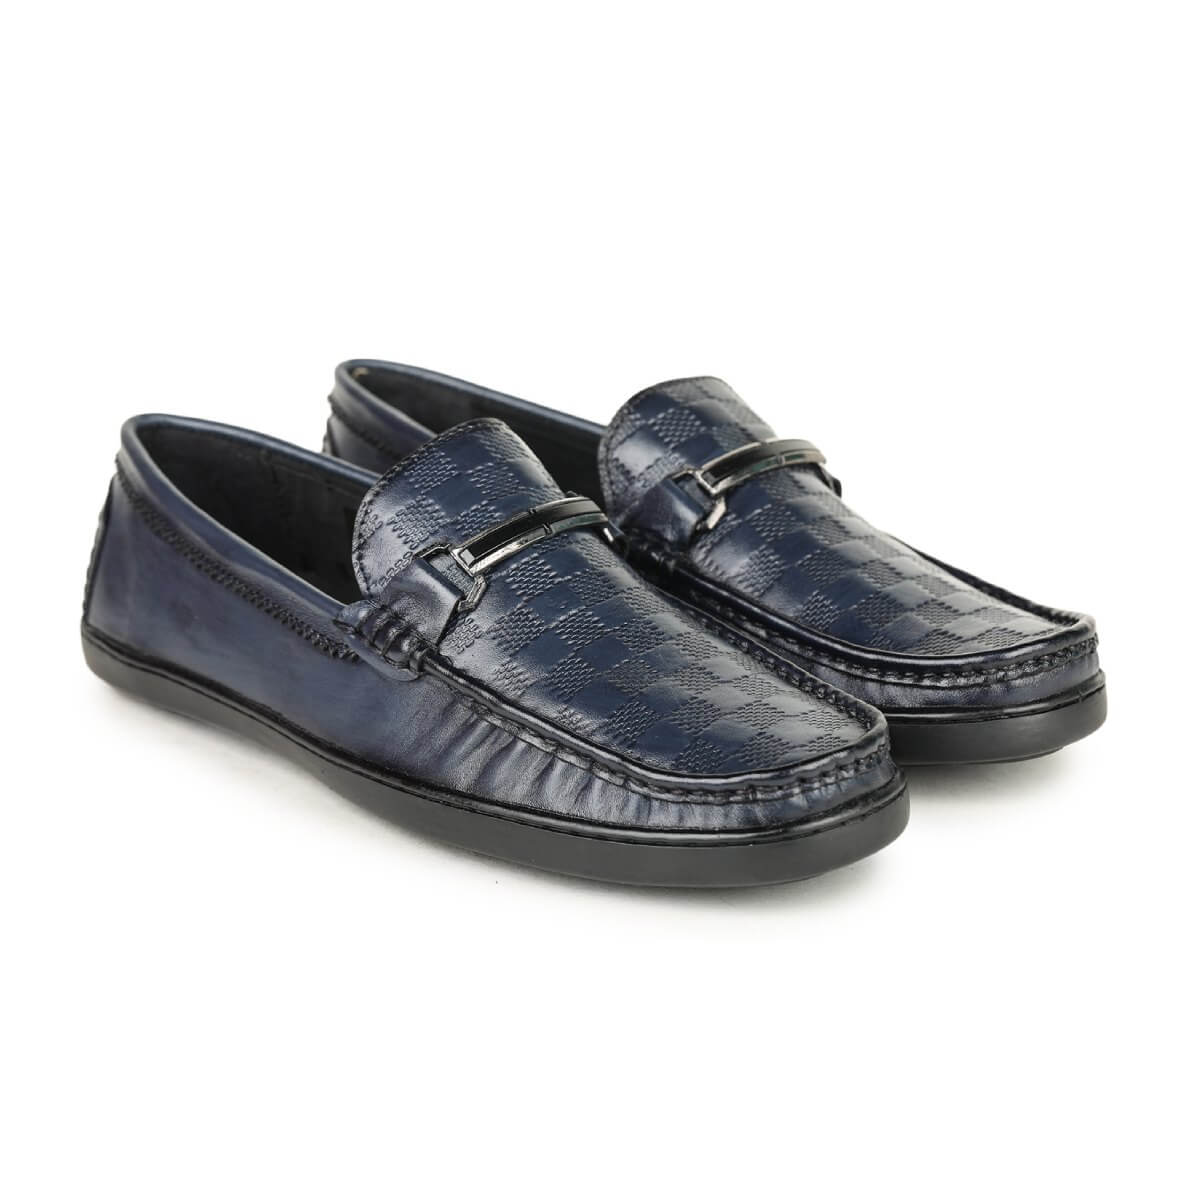 checkbox pattern loafers blue_3